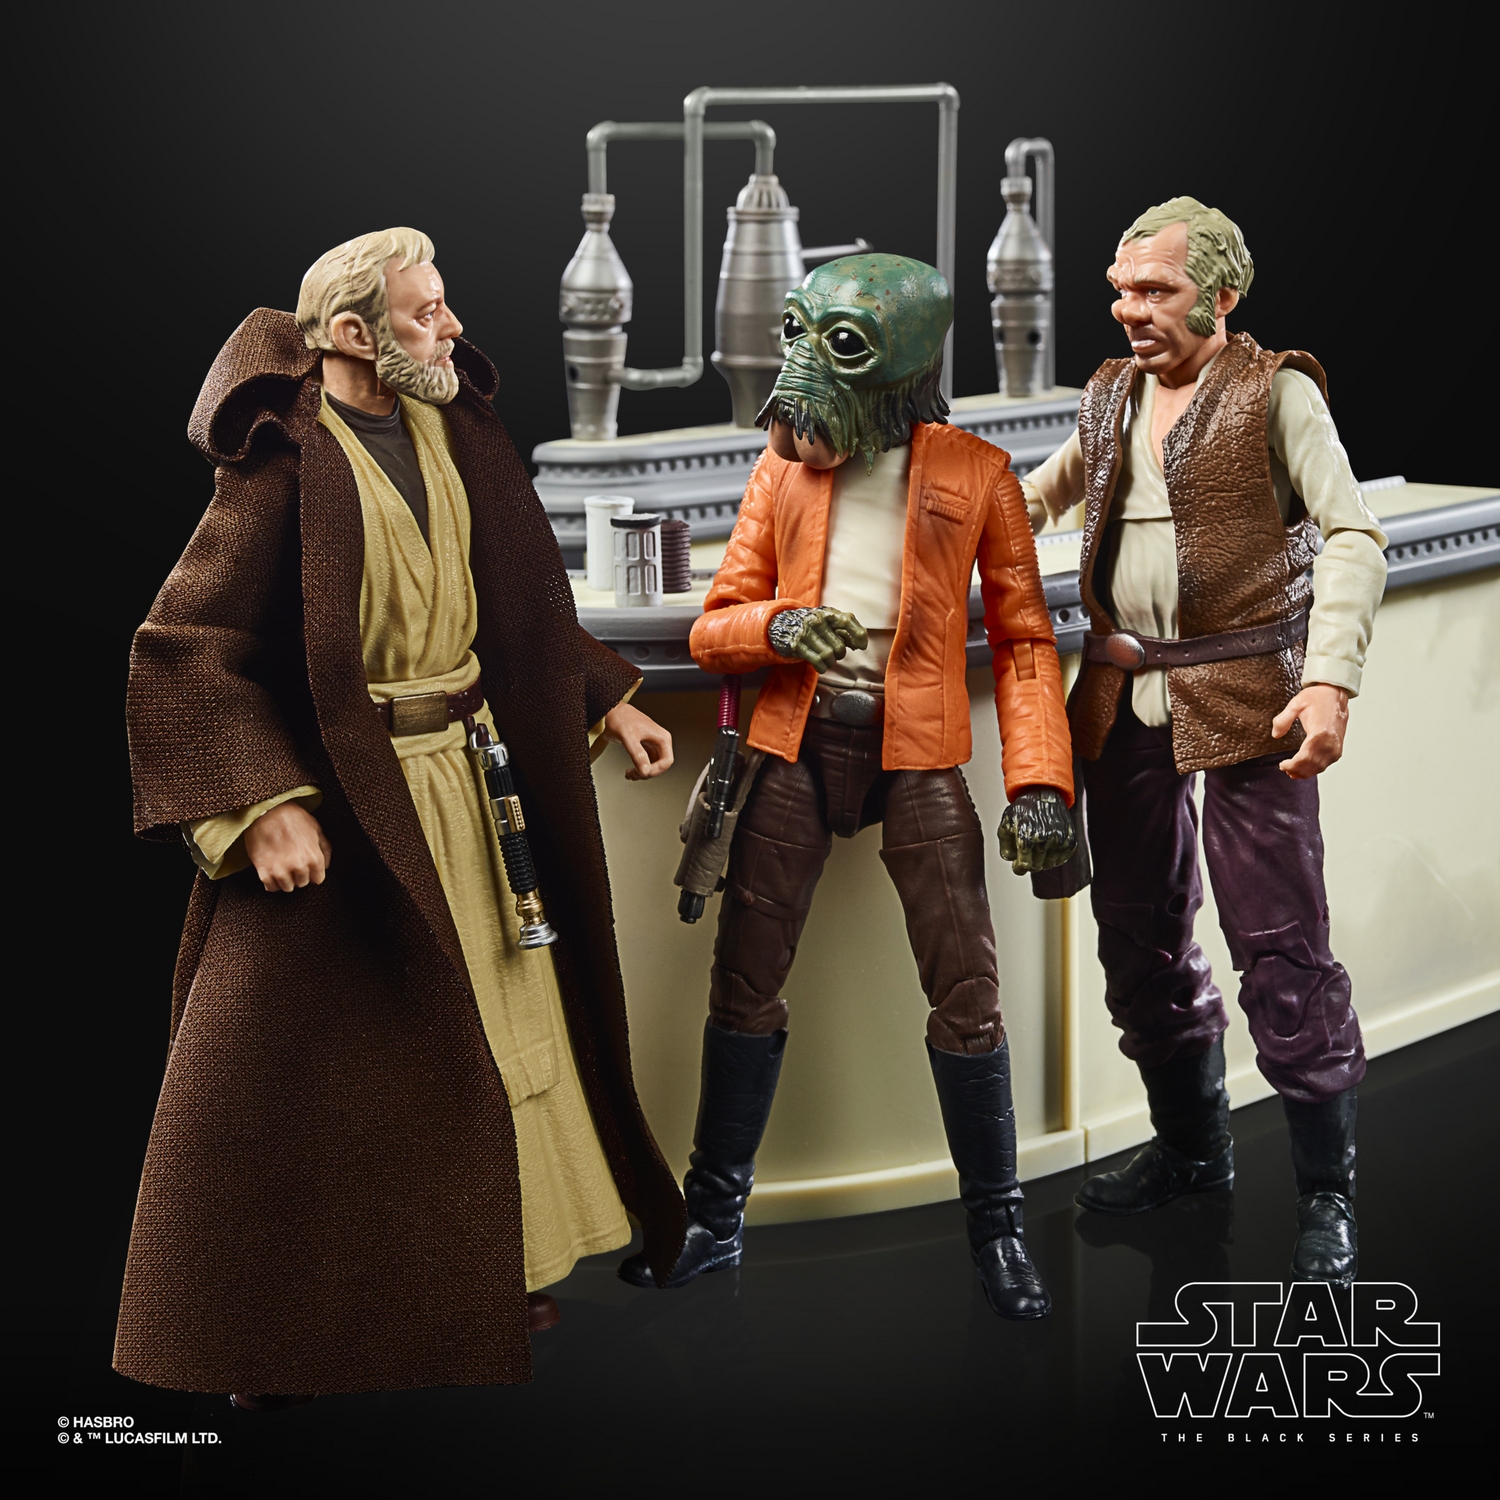 STAR WARS THE BLACK SERIES THE POWER OF THE FORCE CANTINA SHOWDOWN Playset - oop (14).jpg